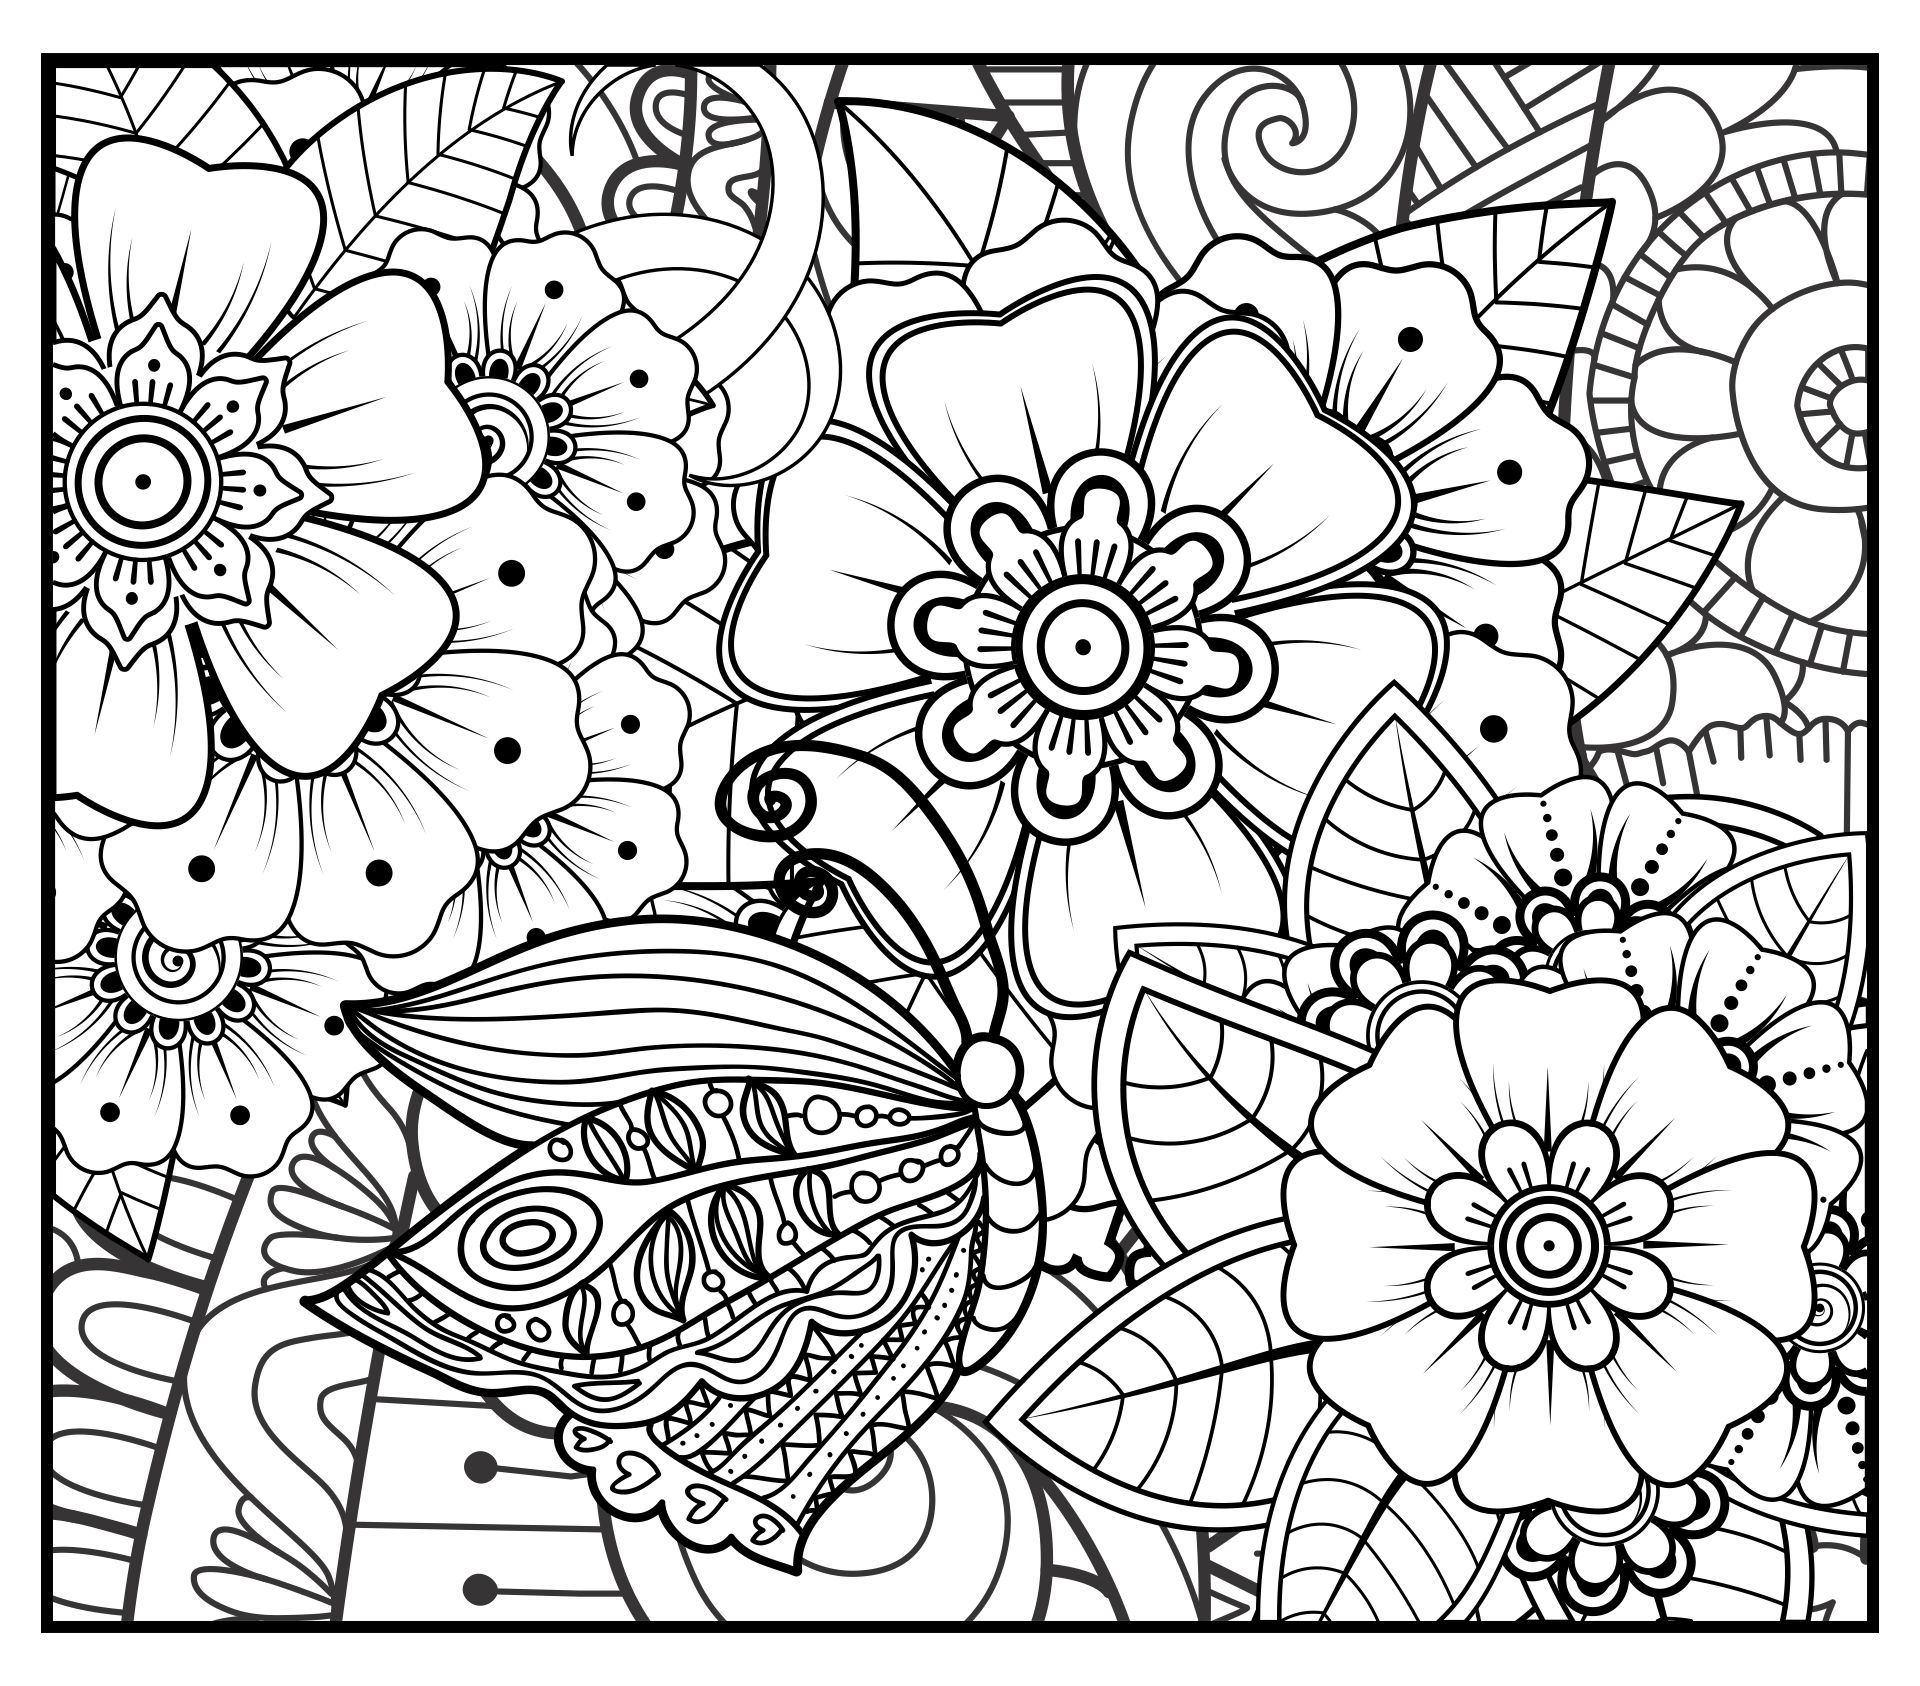 8 Best Images of Printable Coloring Pages Doodle Art Printable Doodle